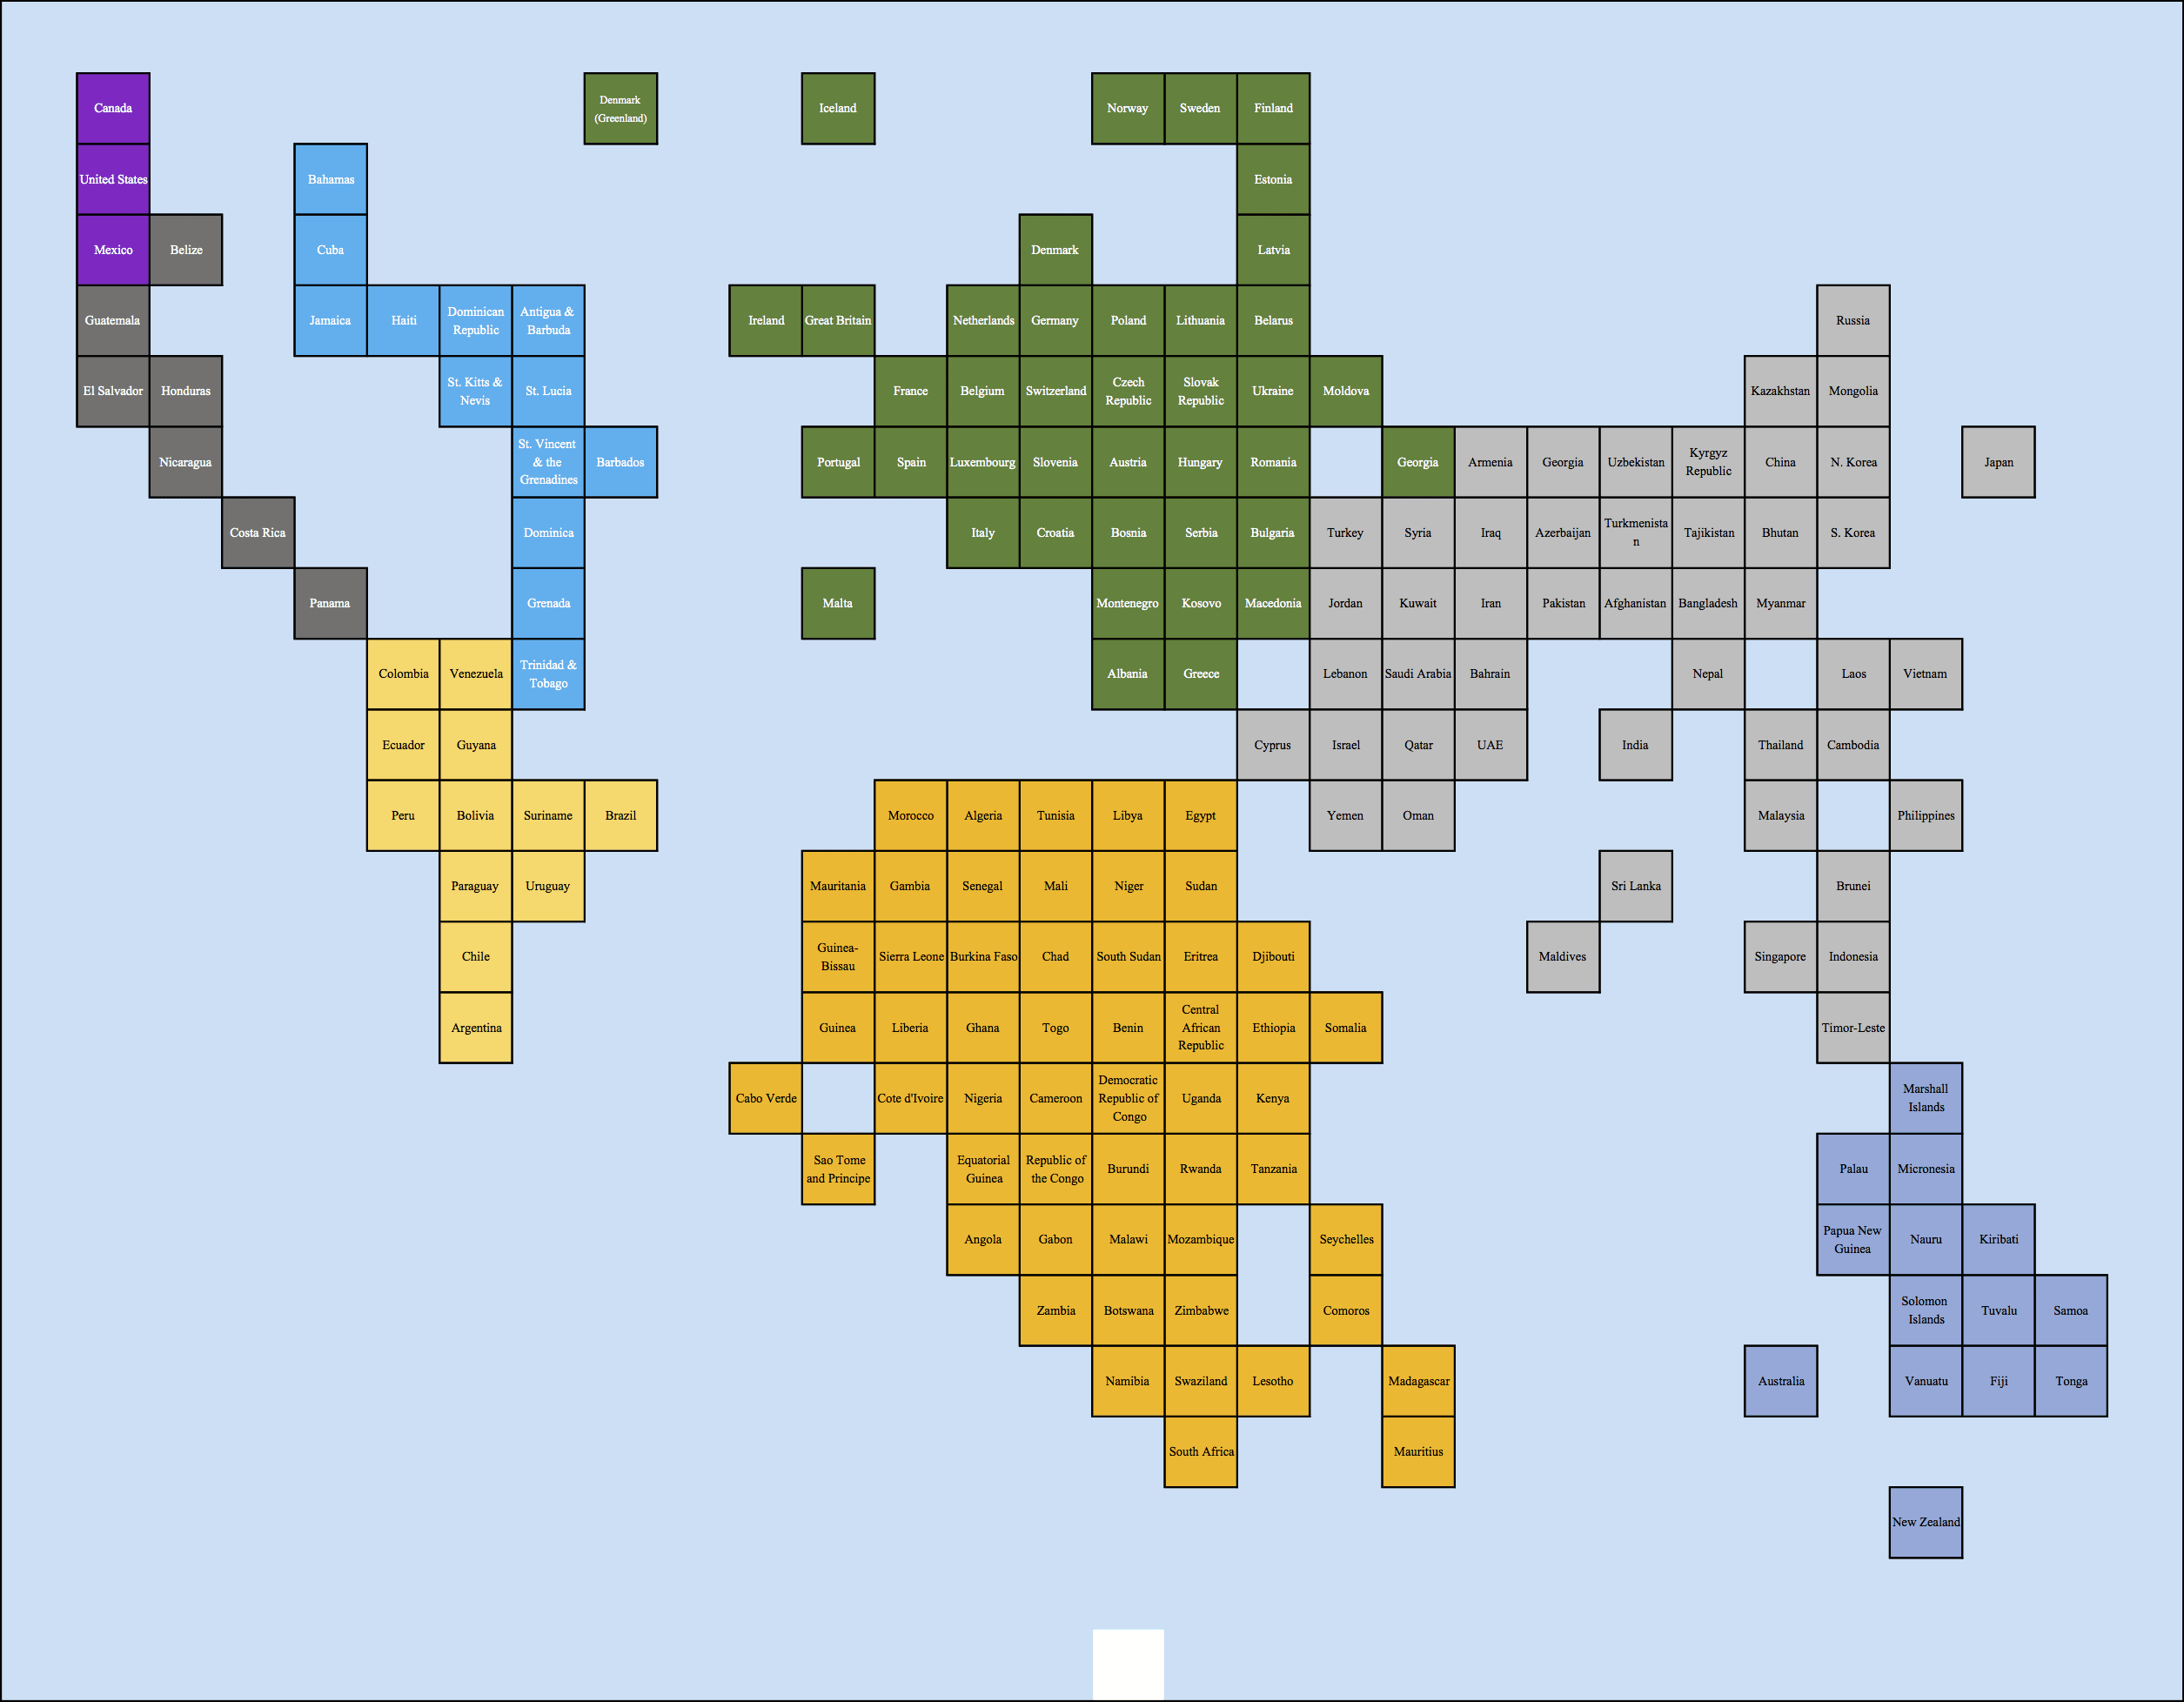 Grid Map Of The World The World Tile Grid Map   Policy Viz